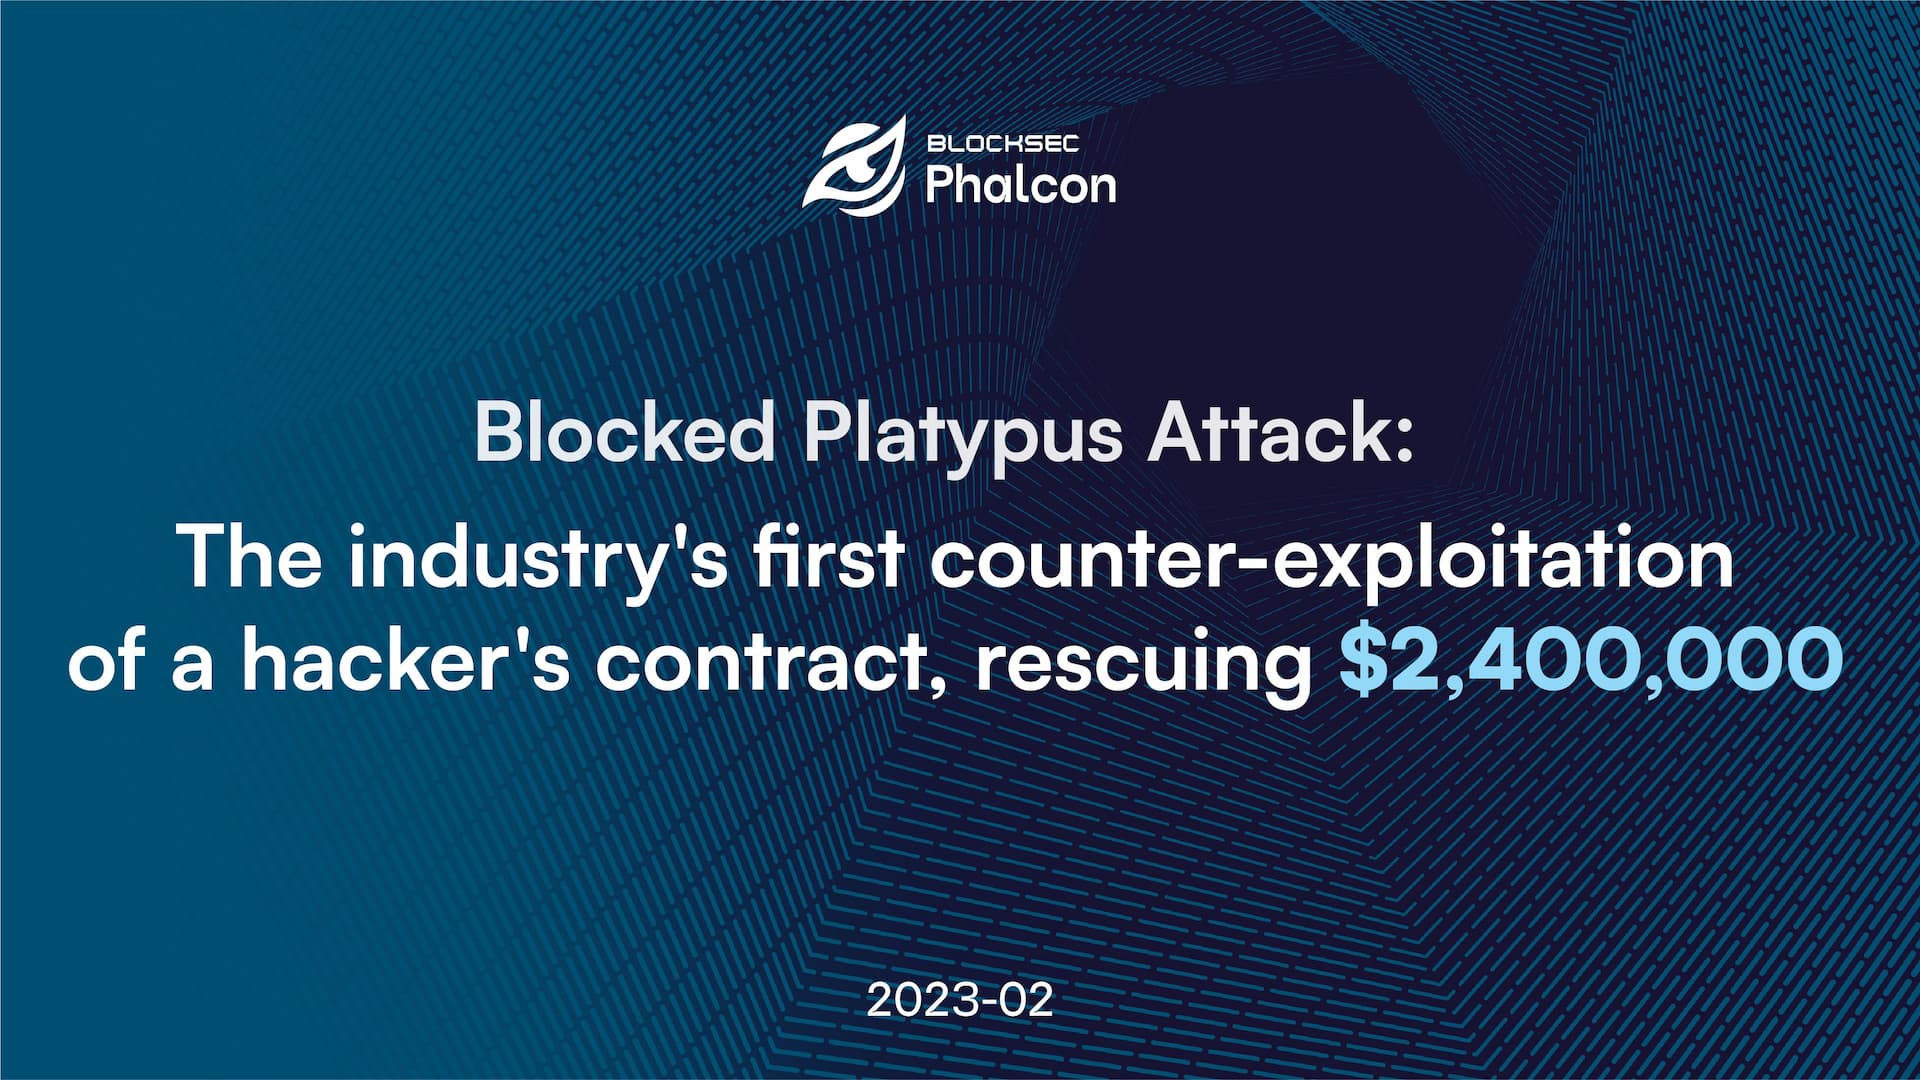 Blocked Platypus Attack: Industry's First Counter-Exploitation of a Hacker's Contract